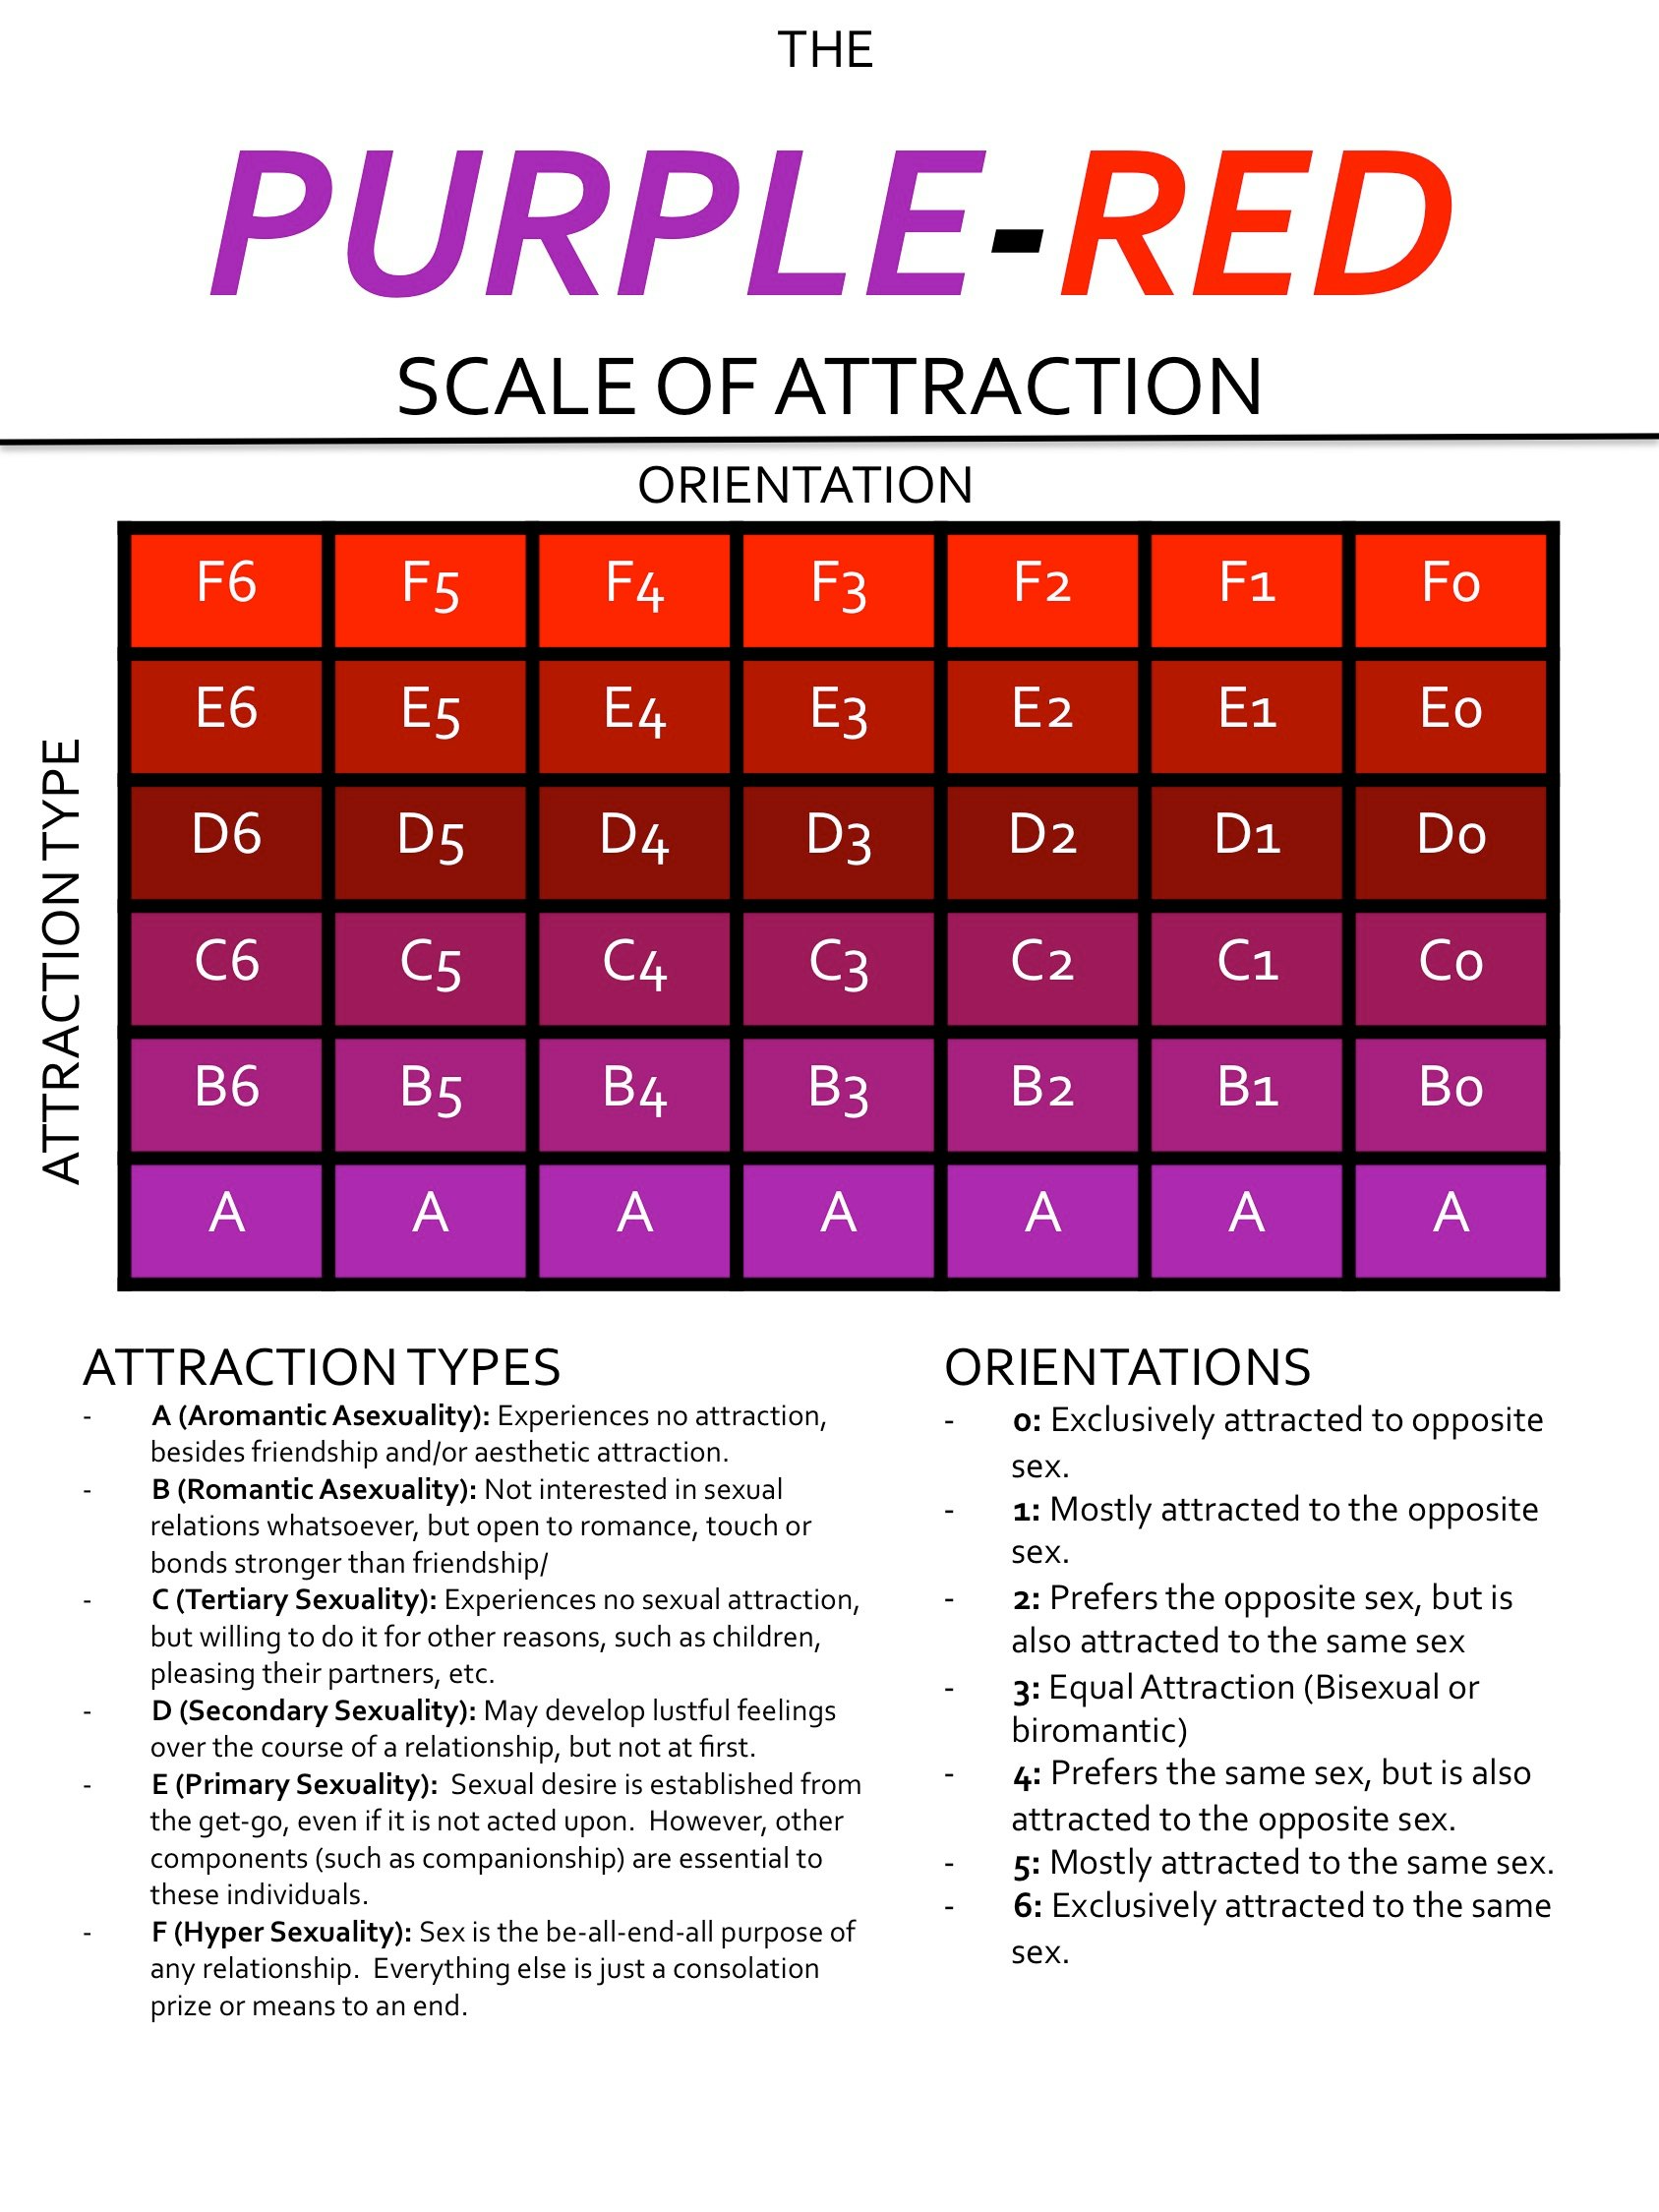 take the kinsey scale test